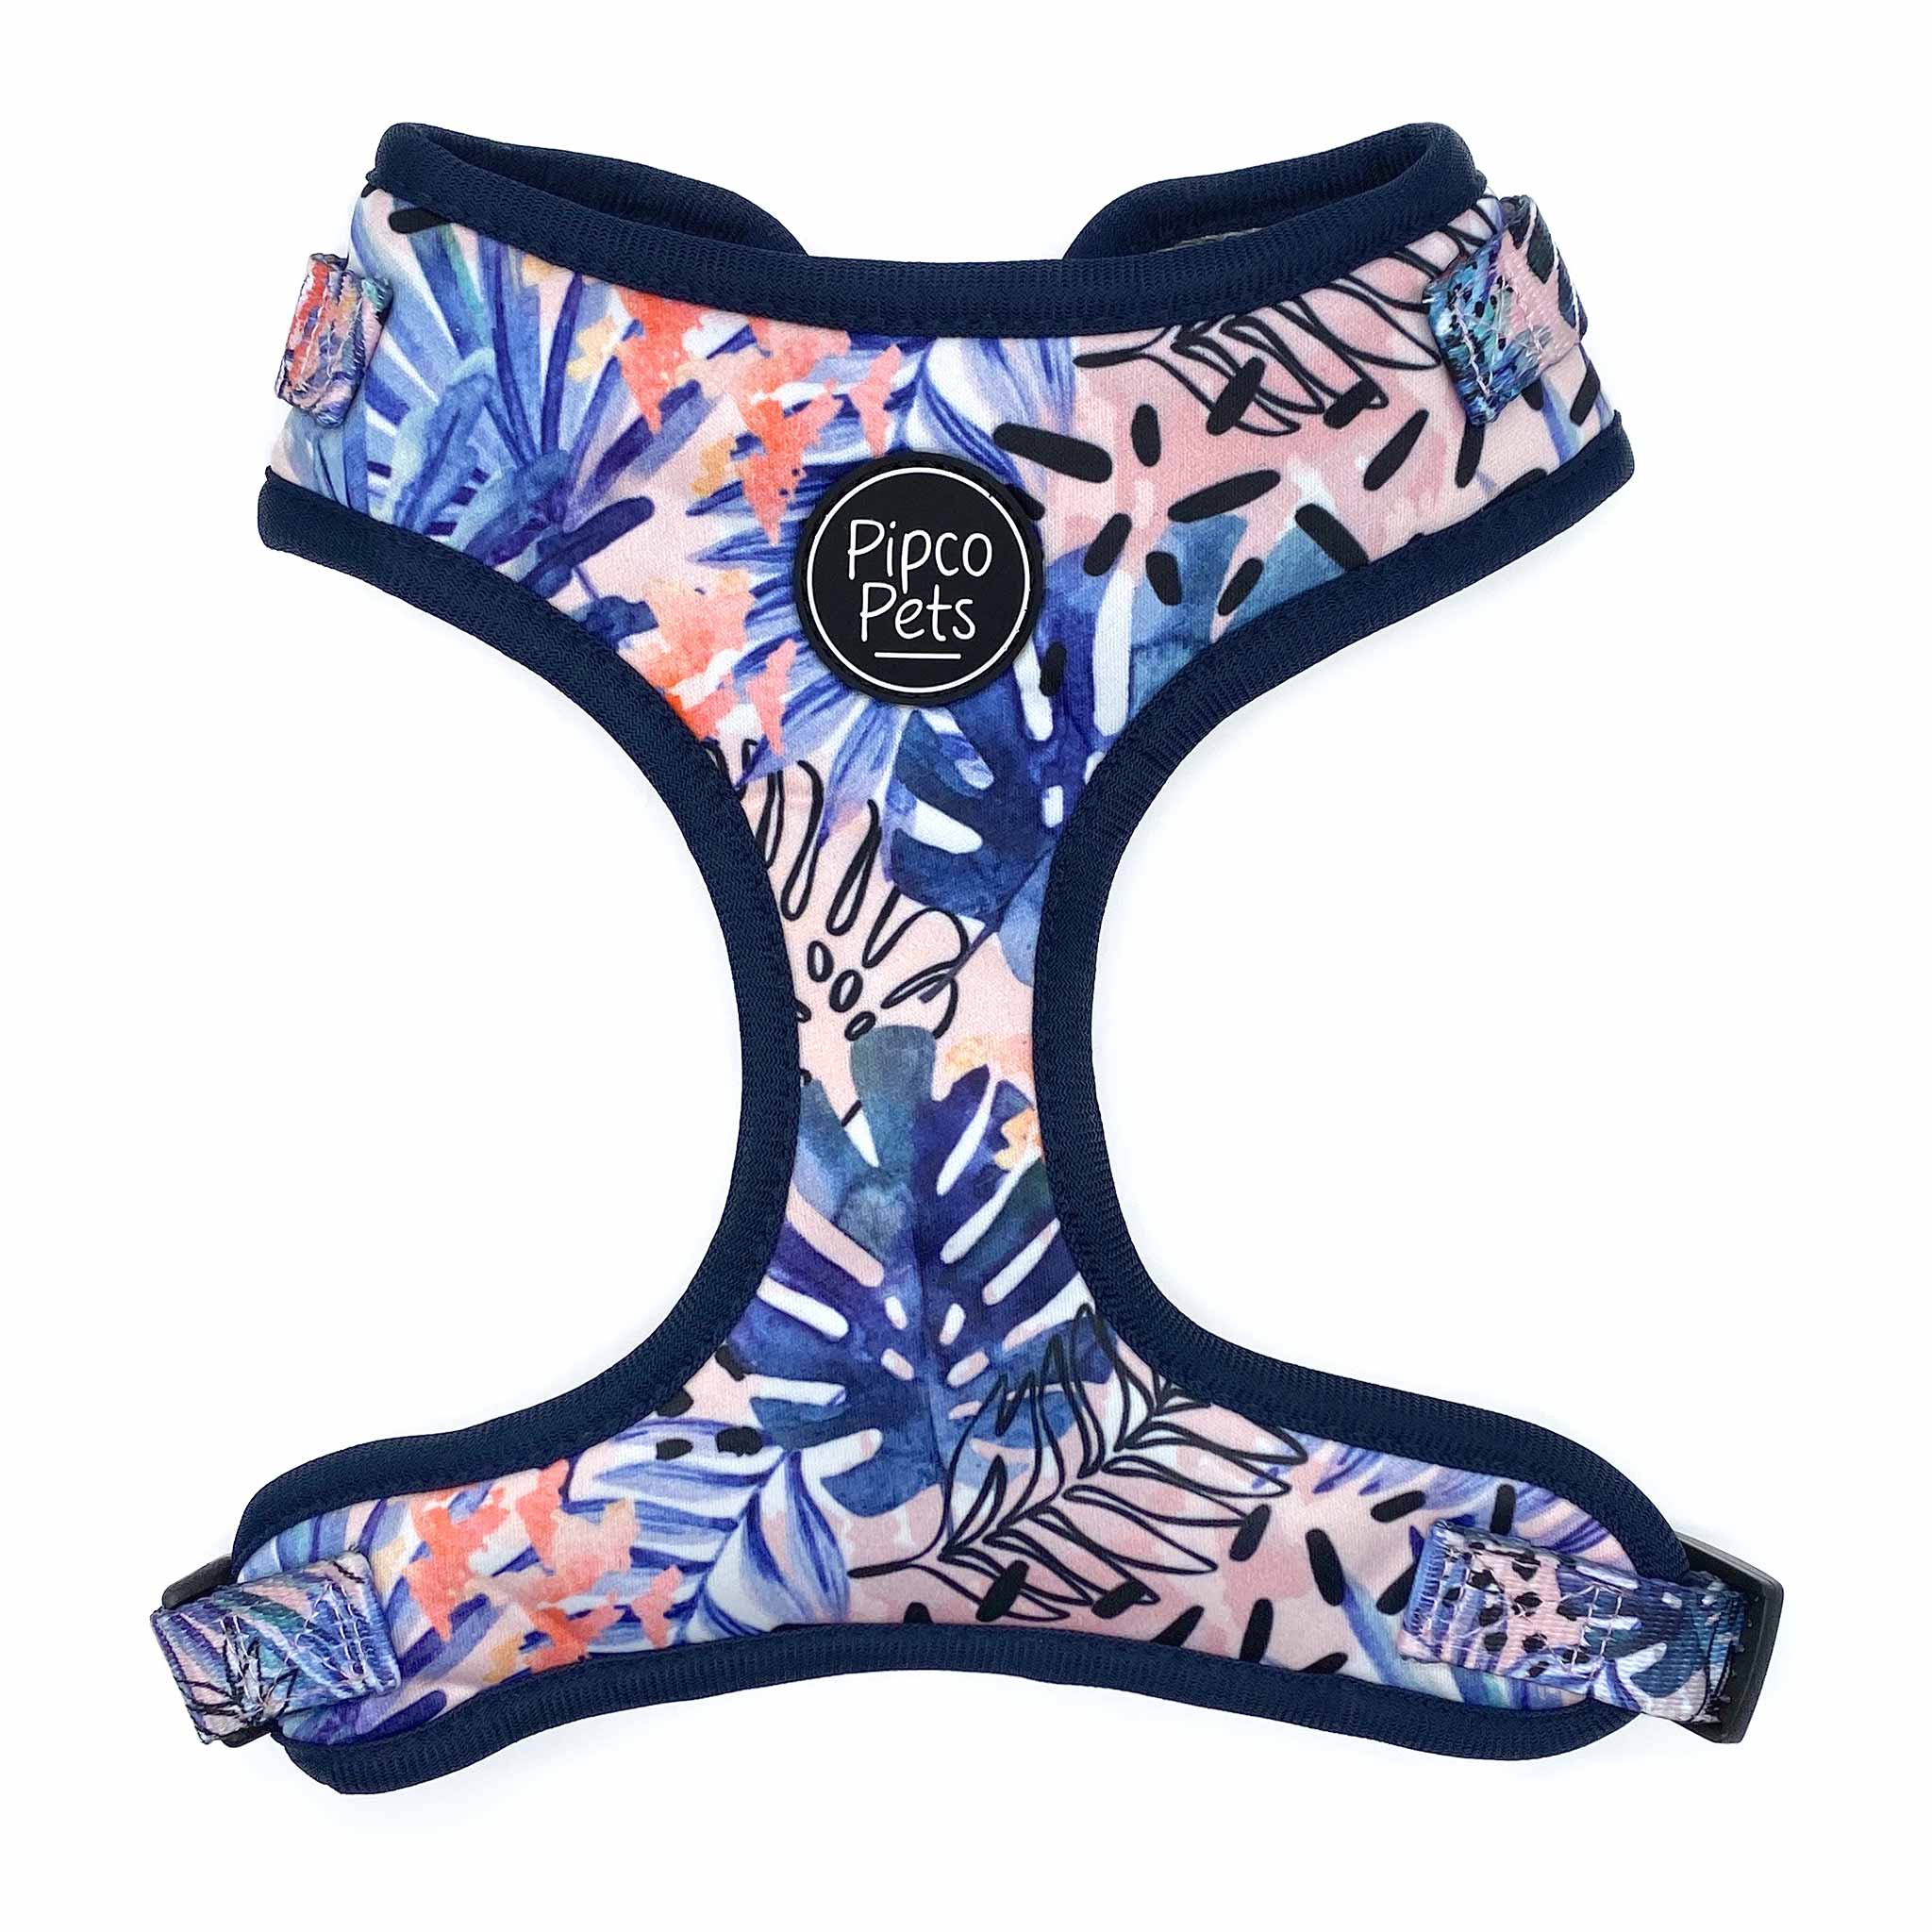 Front view of Pipco Pets adjustable dog harness with Tropic Fronds tropical leaves print pattern in blue